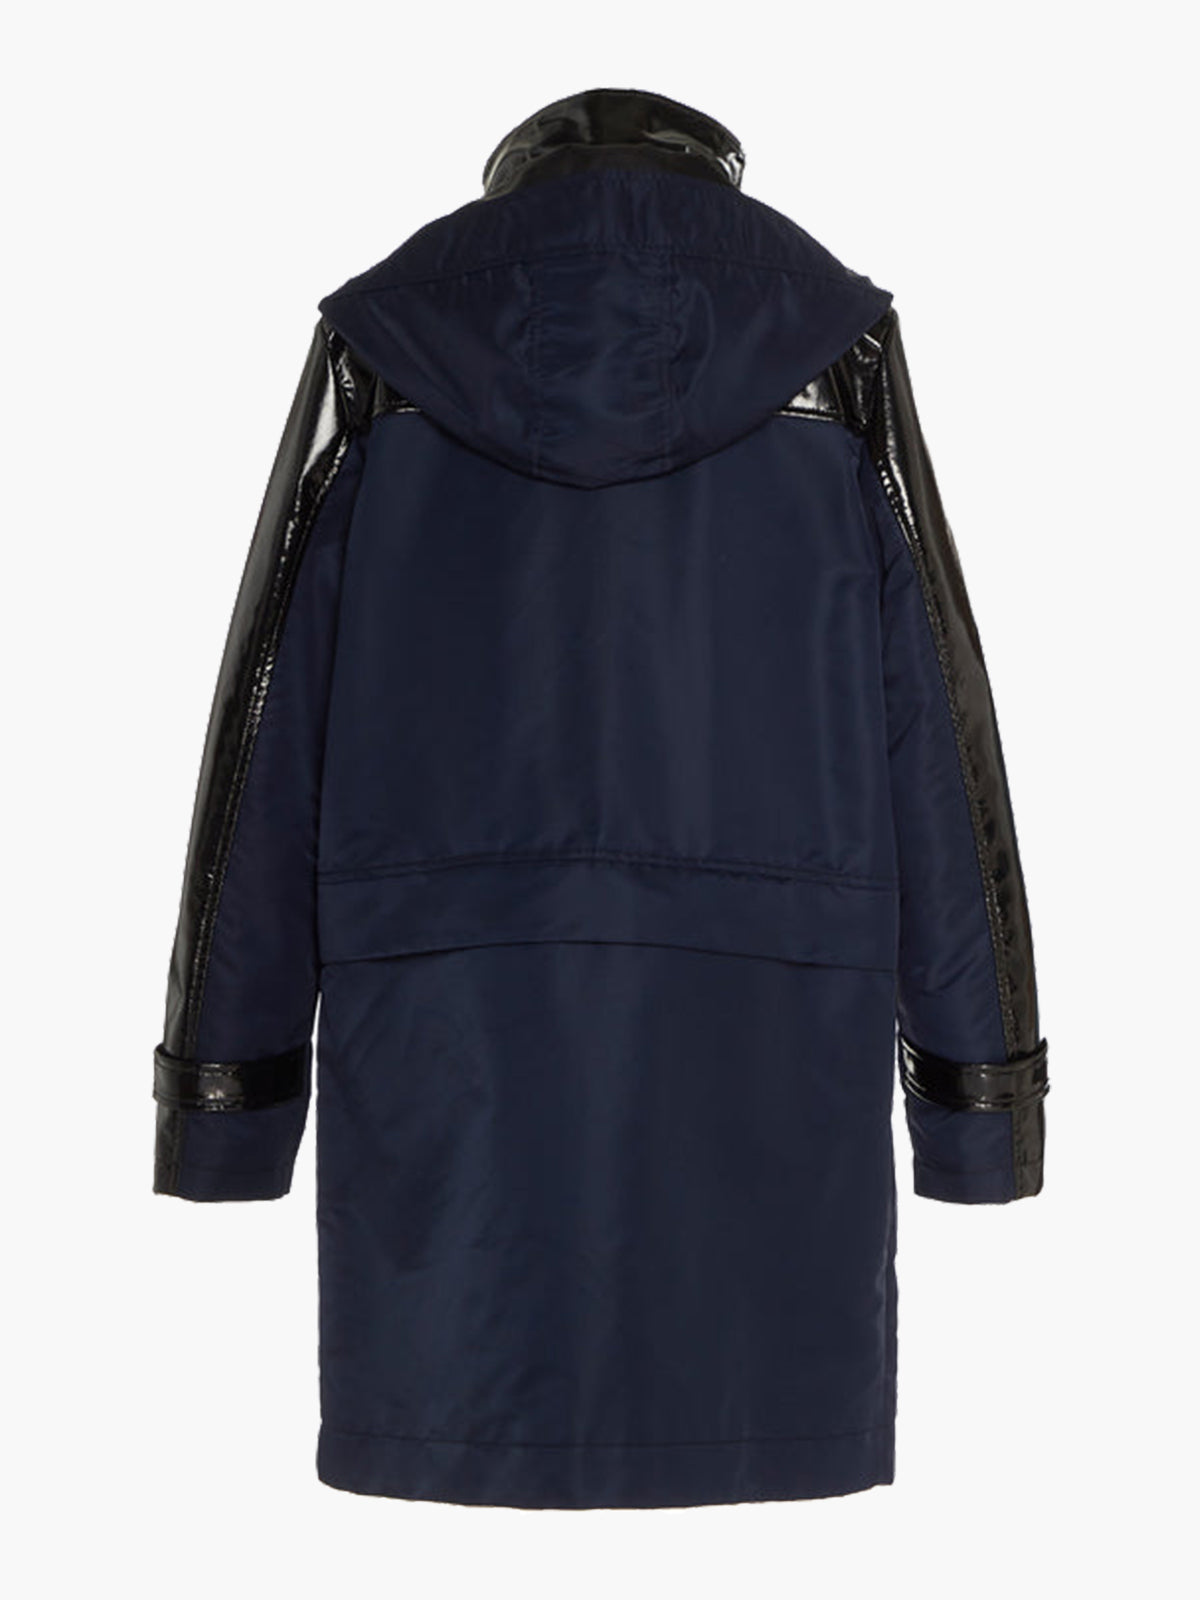 Water Resistant Convertible Sustainable Raincoat | Navy/Black Water Resistant Convertible Sustainable Raincoat | Navy/Black